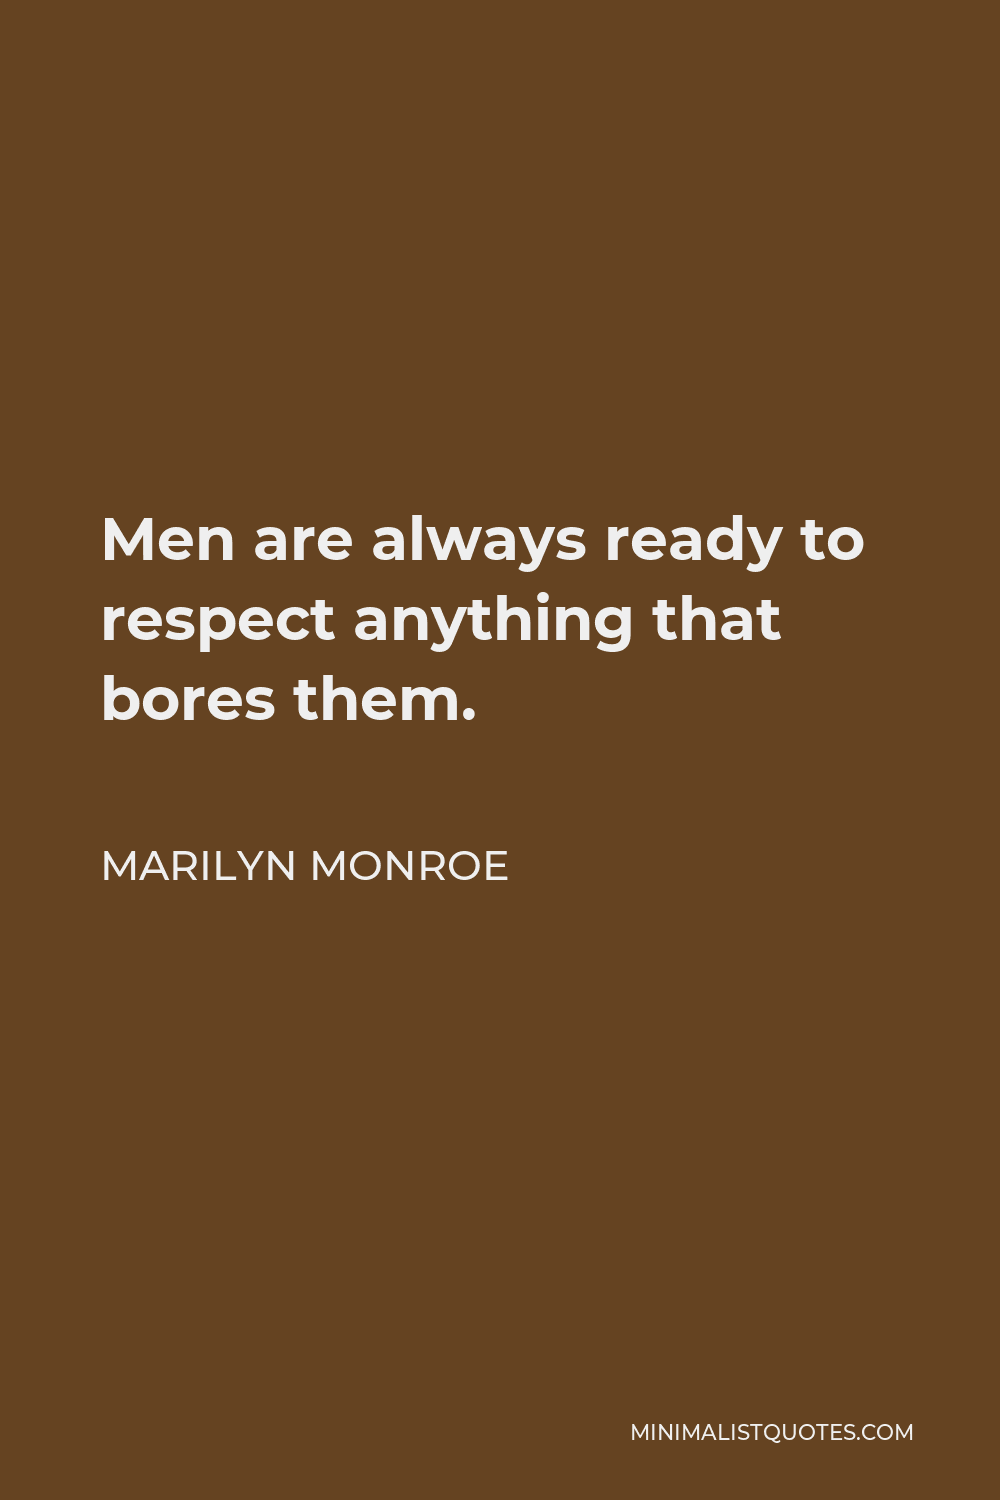 Marilyn Monroe Quote - Men are always ready to respect anything that bores them.